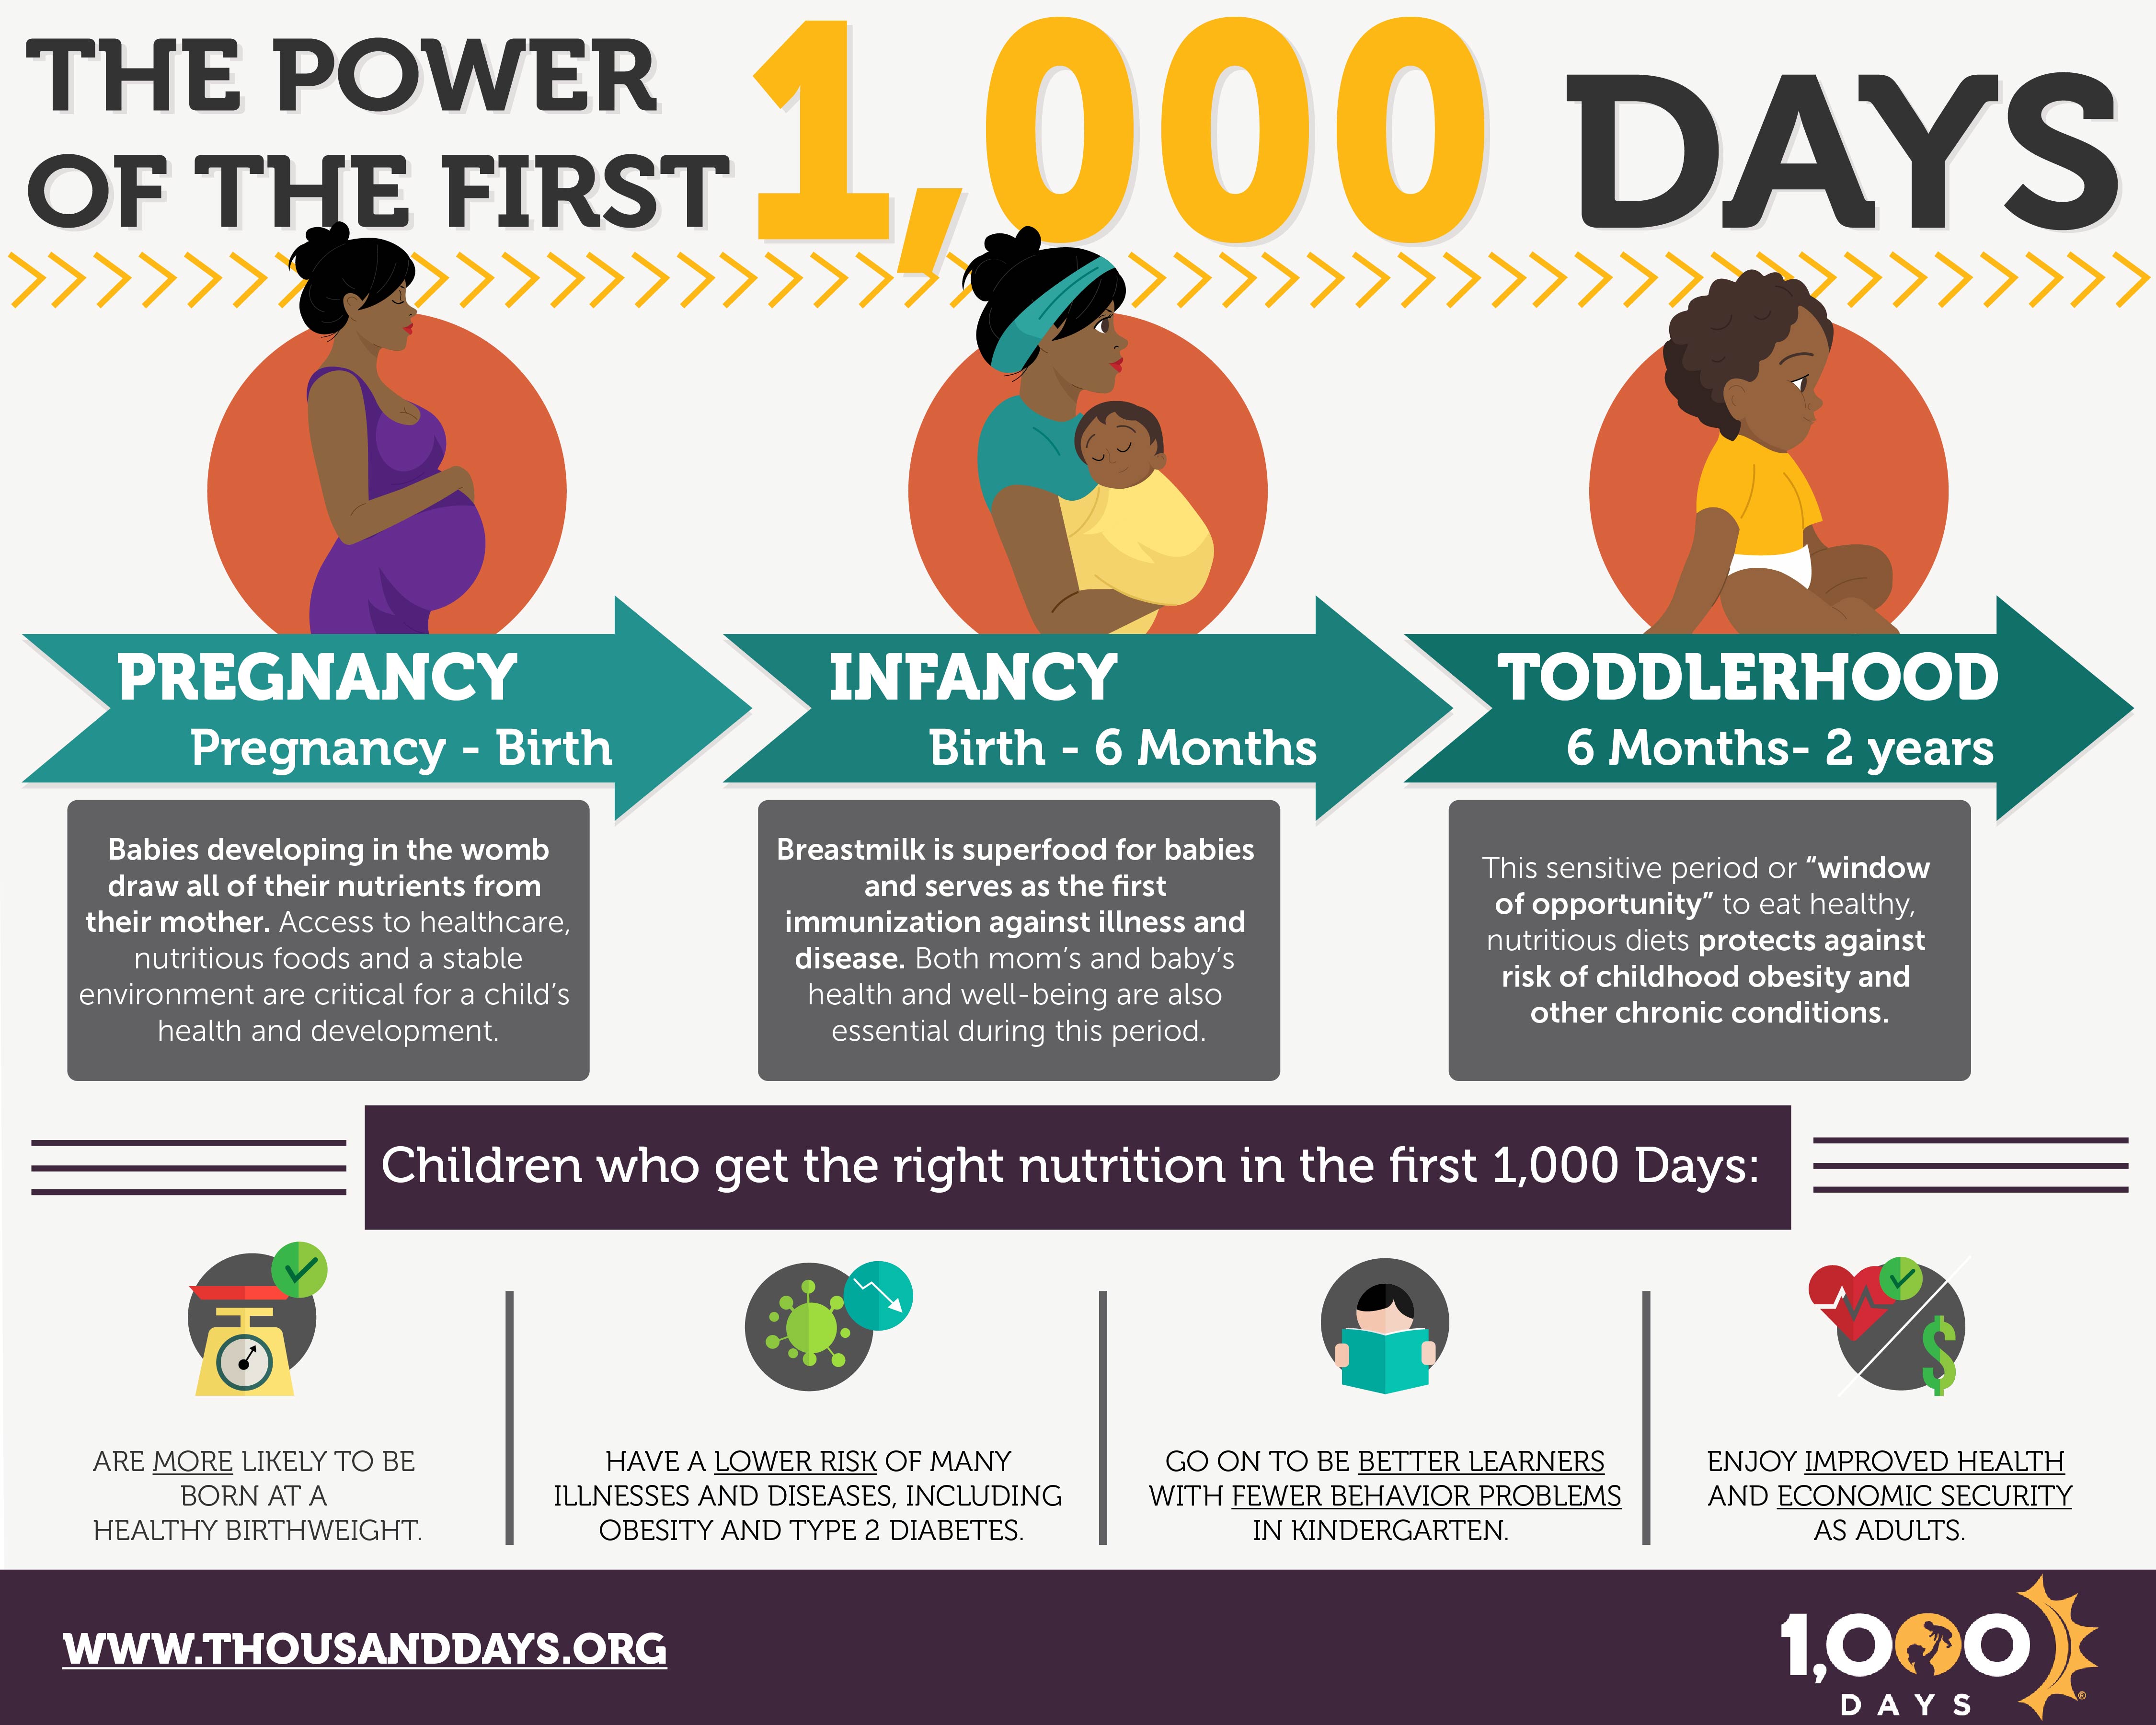 the first 1000 days from pregnancy to toddlerhood